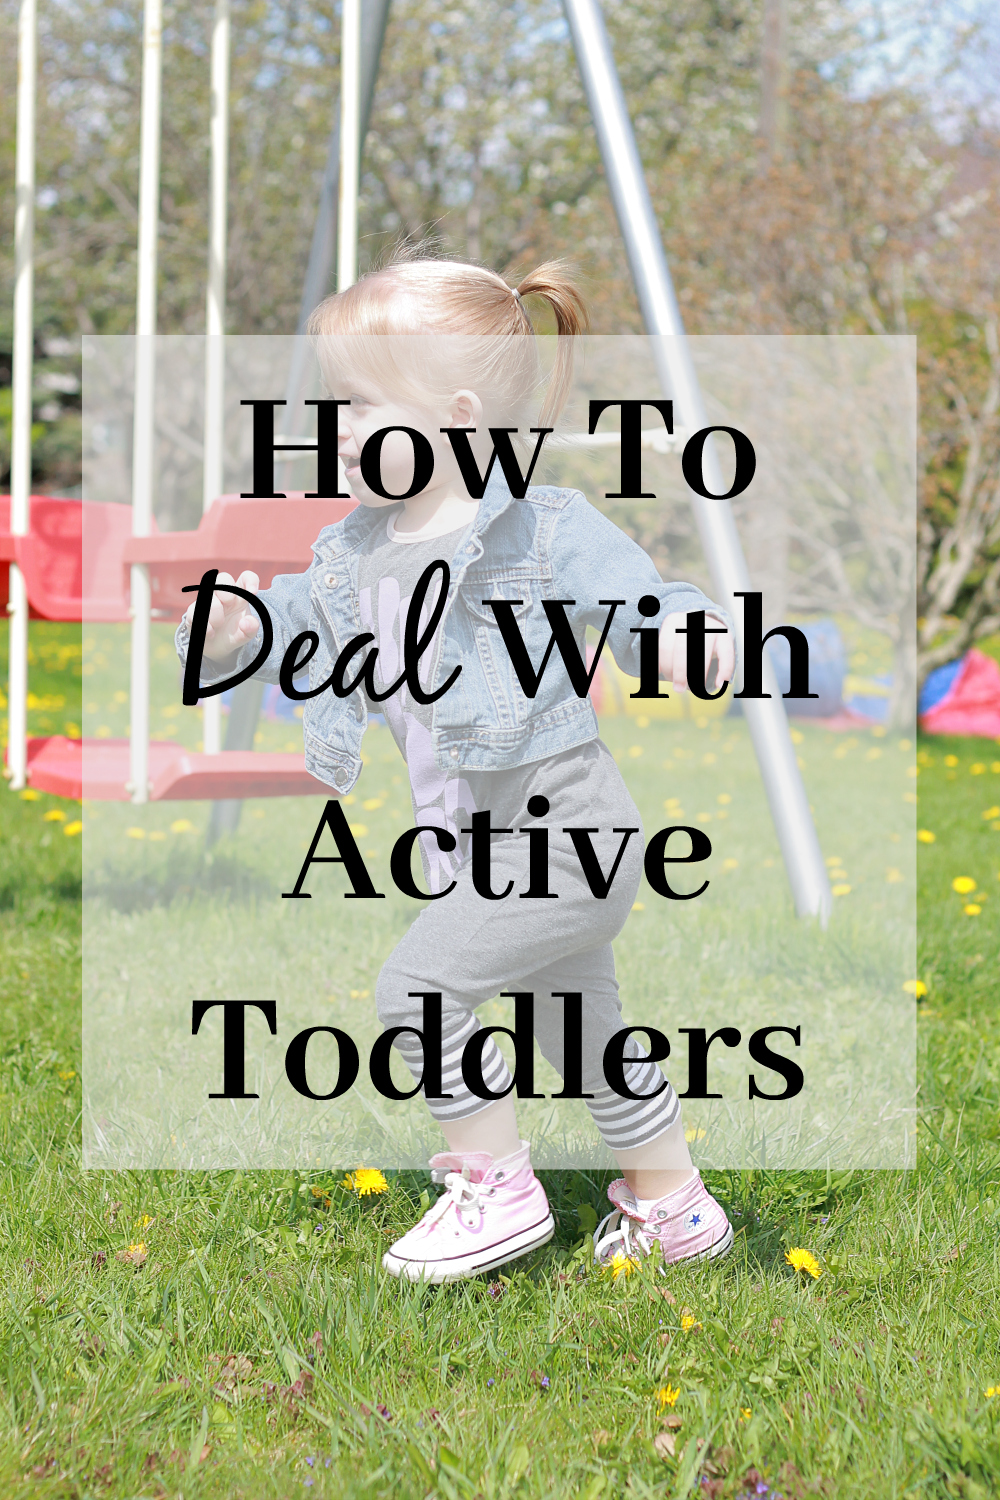 How To Deal With Active Toddlers